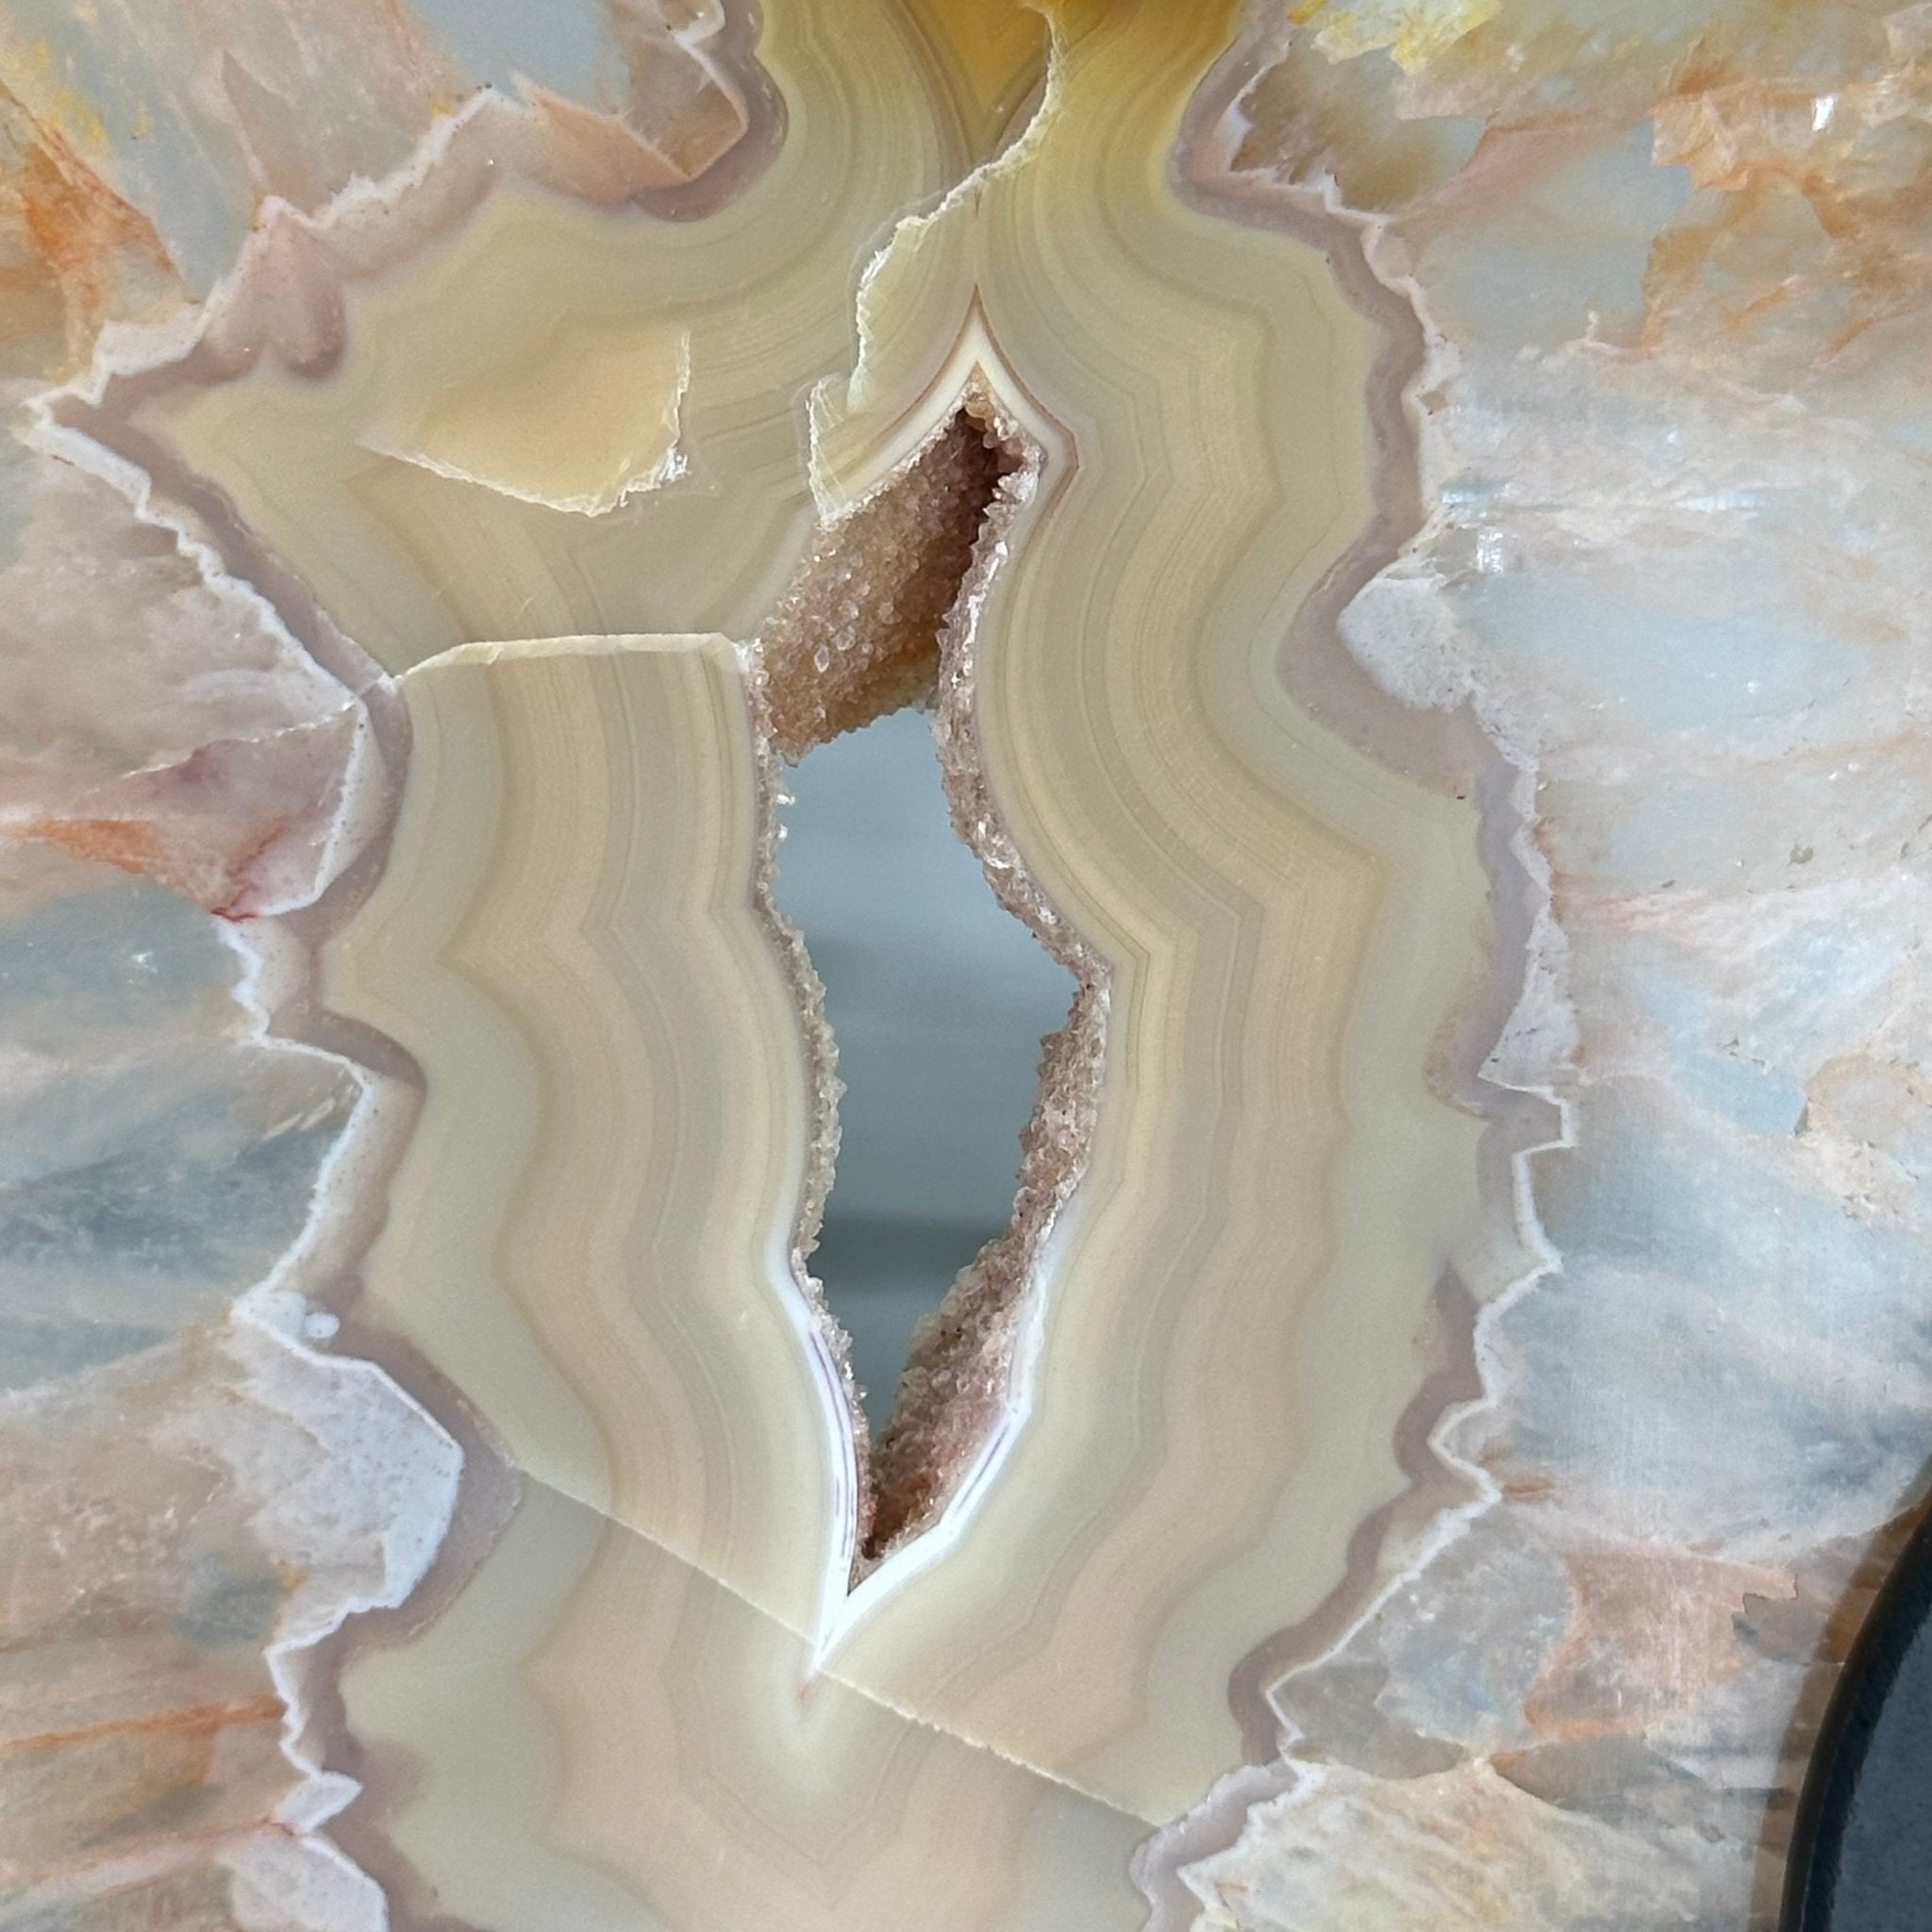 Natural Brazilian Agate "Butterfly Wings", 9.9" Tall #5050NA-116 - Brazil GemsBrazil GemsNatural Brazilian Agate "Butterfly Wings", 9.9" Tall #5050NA-116Agate Butterfly Wings5050NA-116